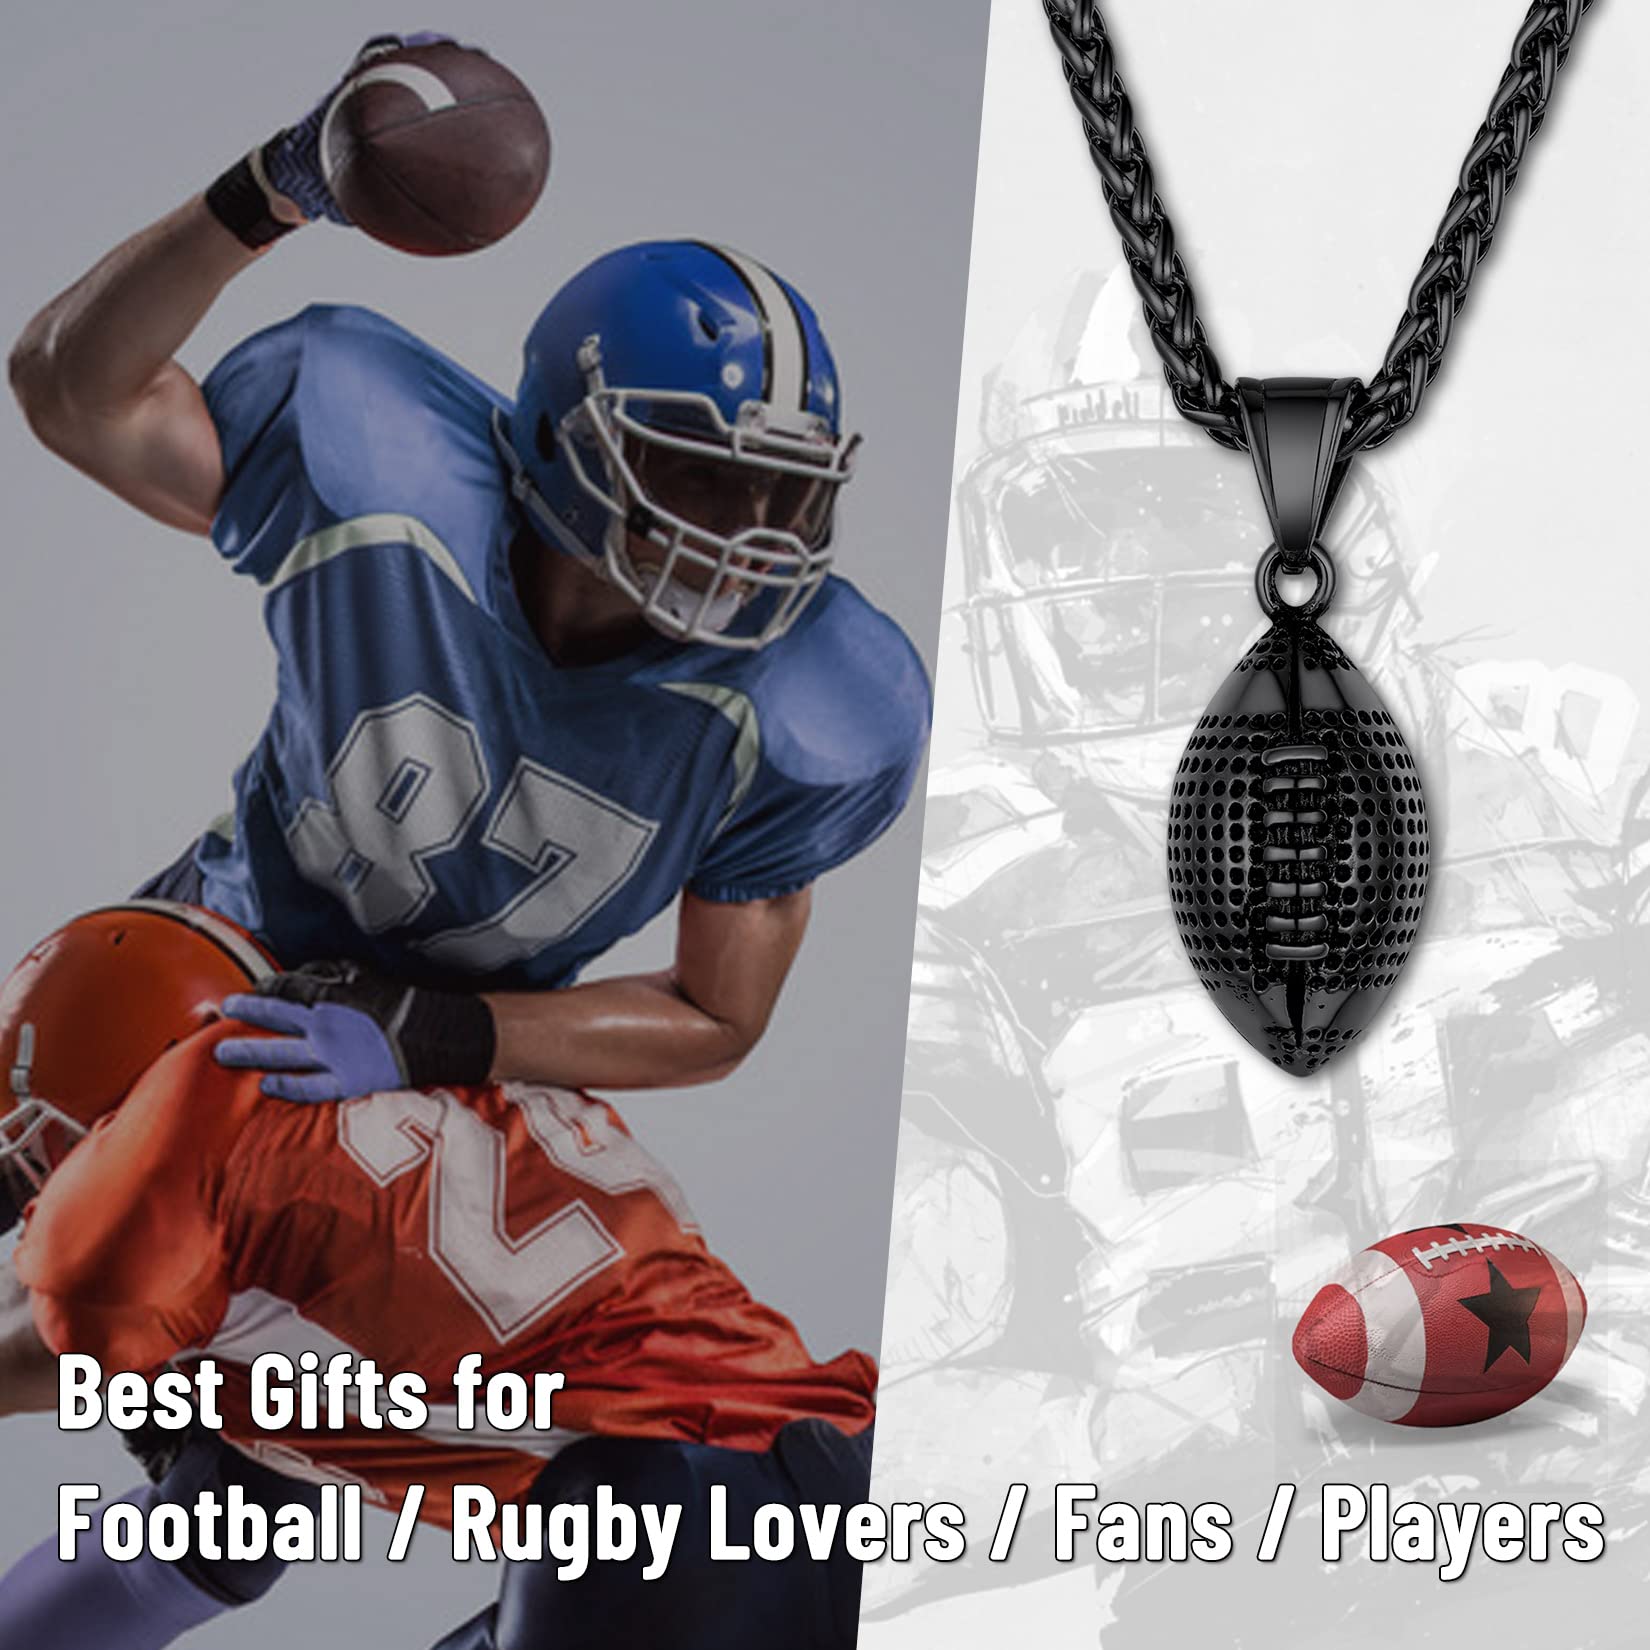 GOLDCHIC JEWELRY Sport Necklace for Men Boys, Customized Unisex Stainless Steel Baseball Cross necklace/Soccer/Football/Basketball Necklace with Chain 22”+2